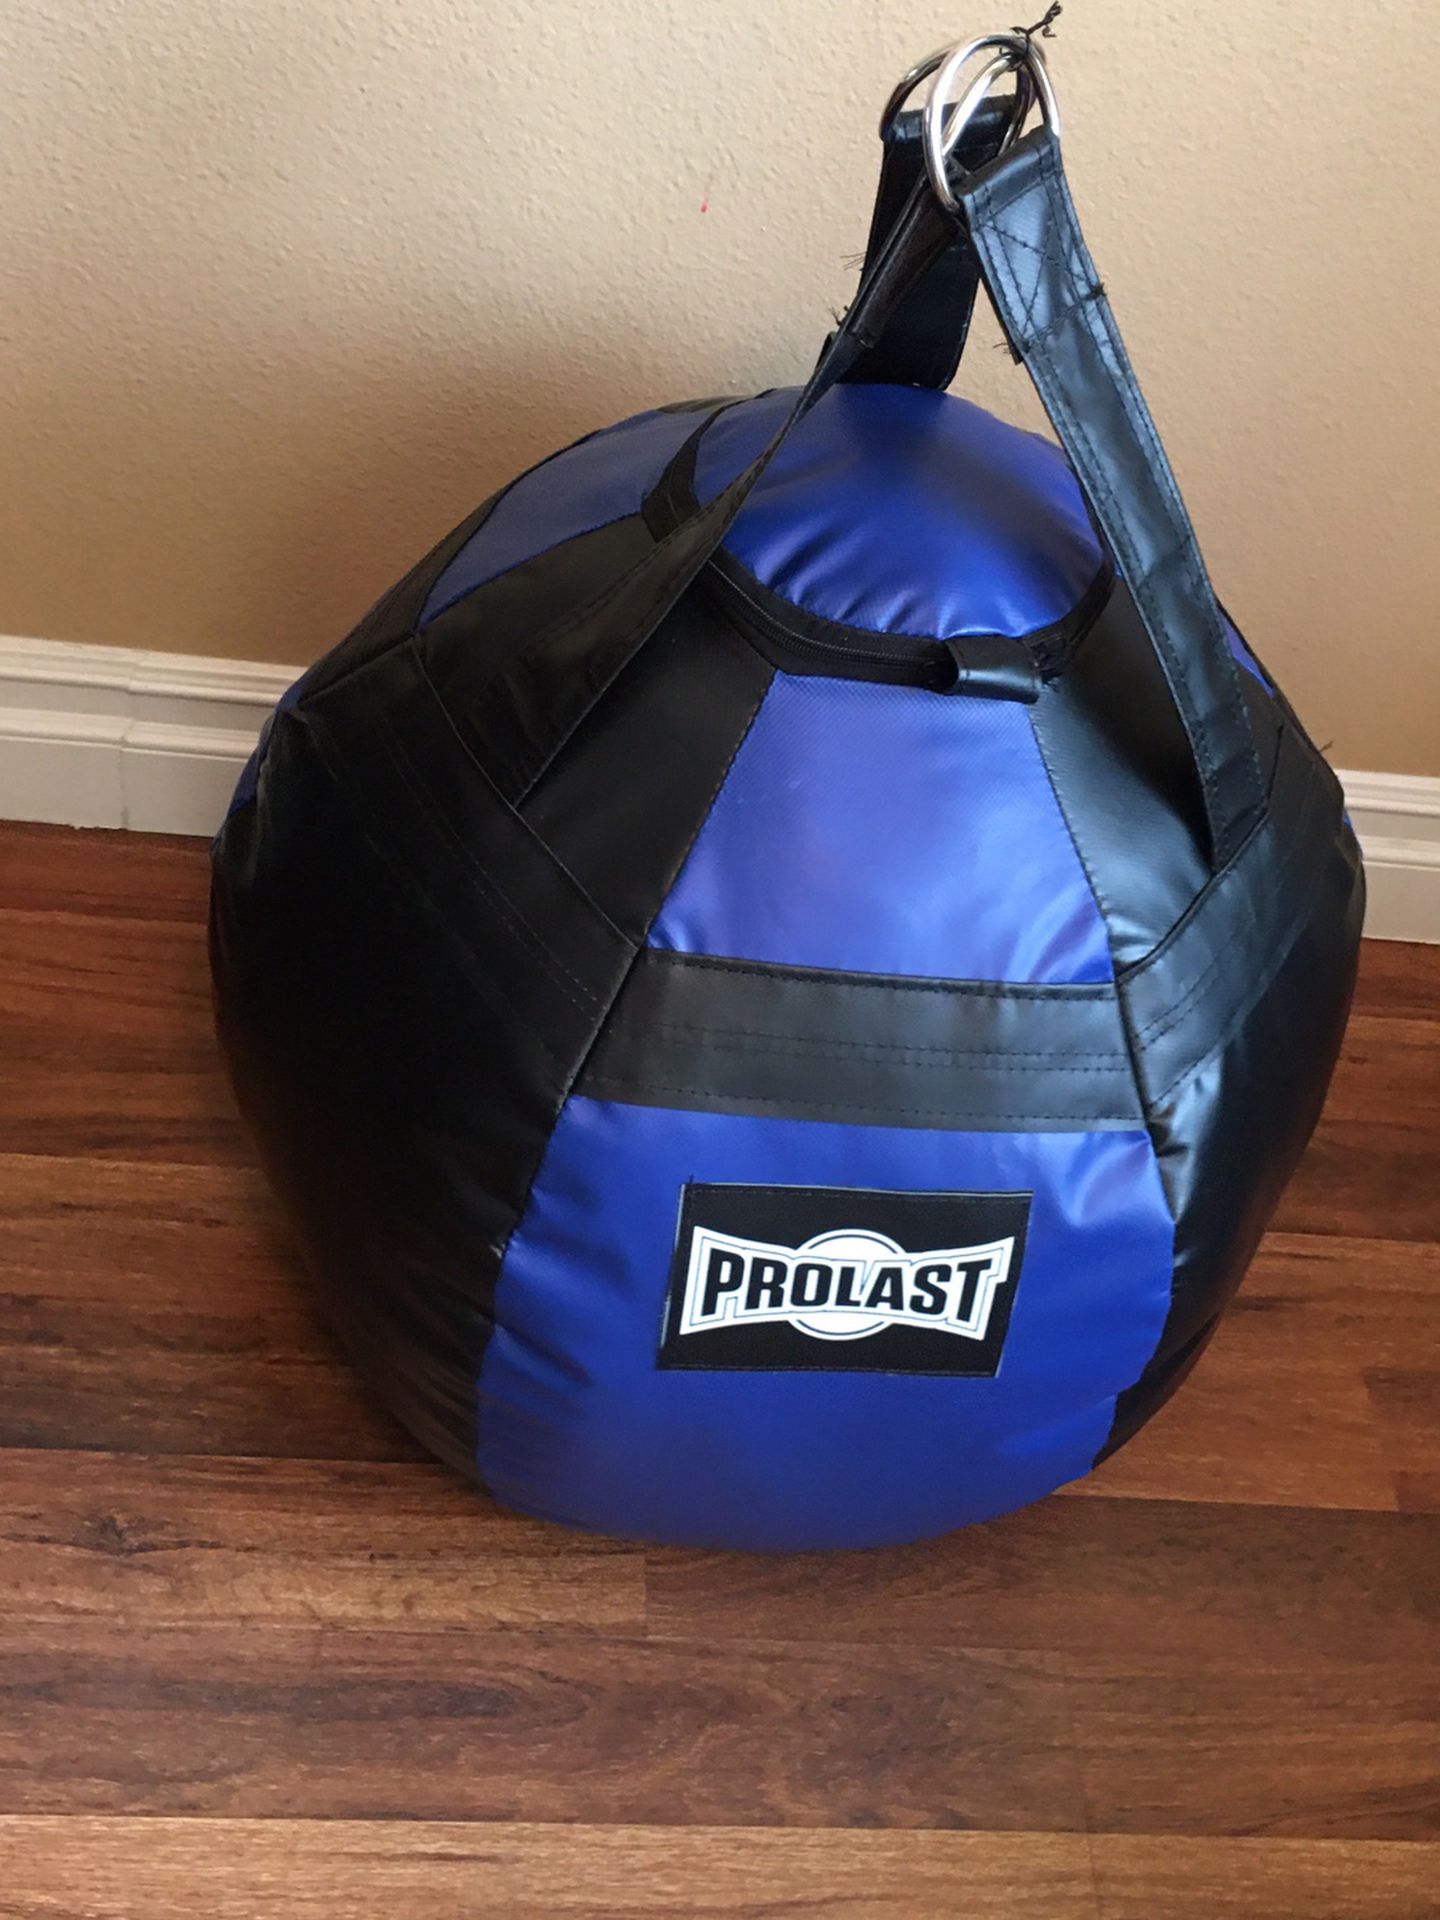 PUNCHING BAG BRAND NEW WREAKING BALL PERFECT 100 POUNDS FILLED LUXURY MADE USA